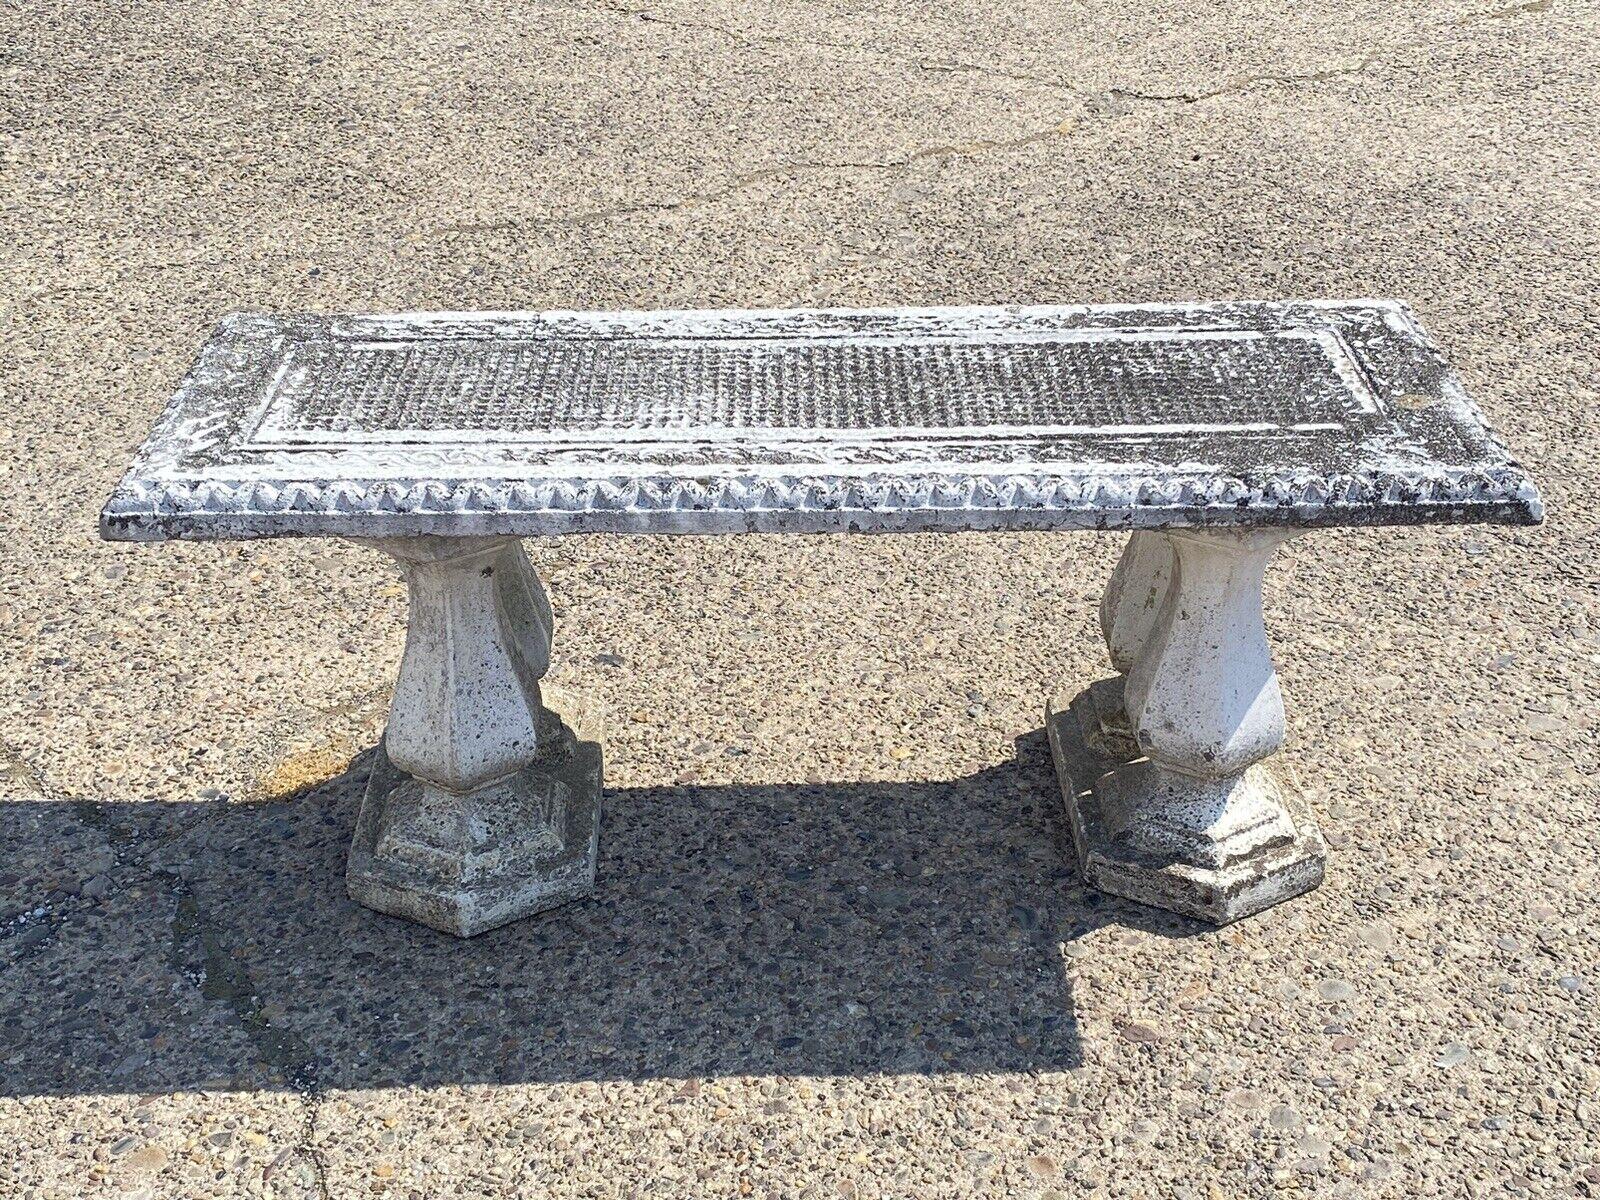 Vintage Classical Style White Concrete Cement Double Baluster Pedestal Outdoor Garden Bench.
Item features a cast concrete design, 3 part construction, unique double baluster pedestal bases, attractive distressed/weathered finish, quality